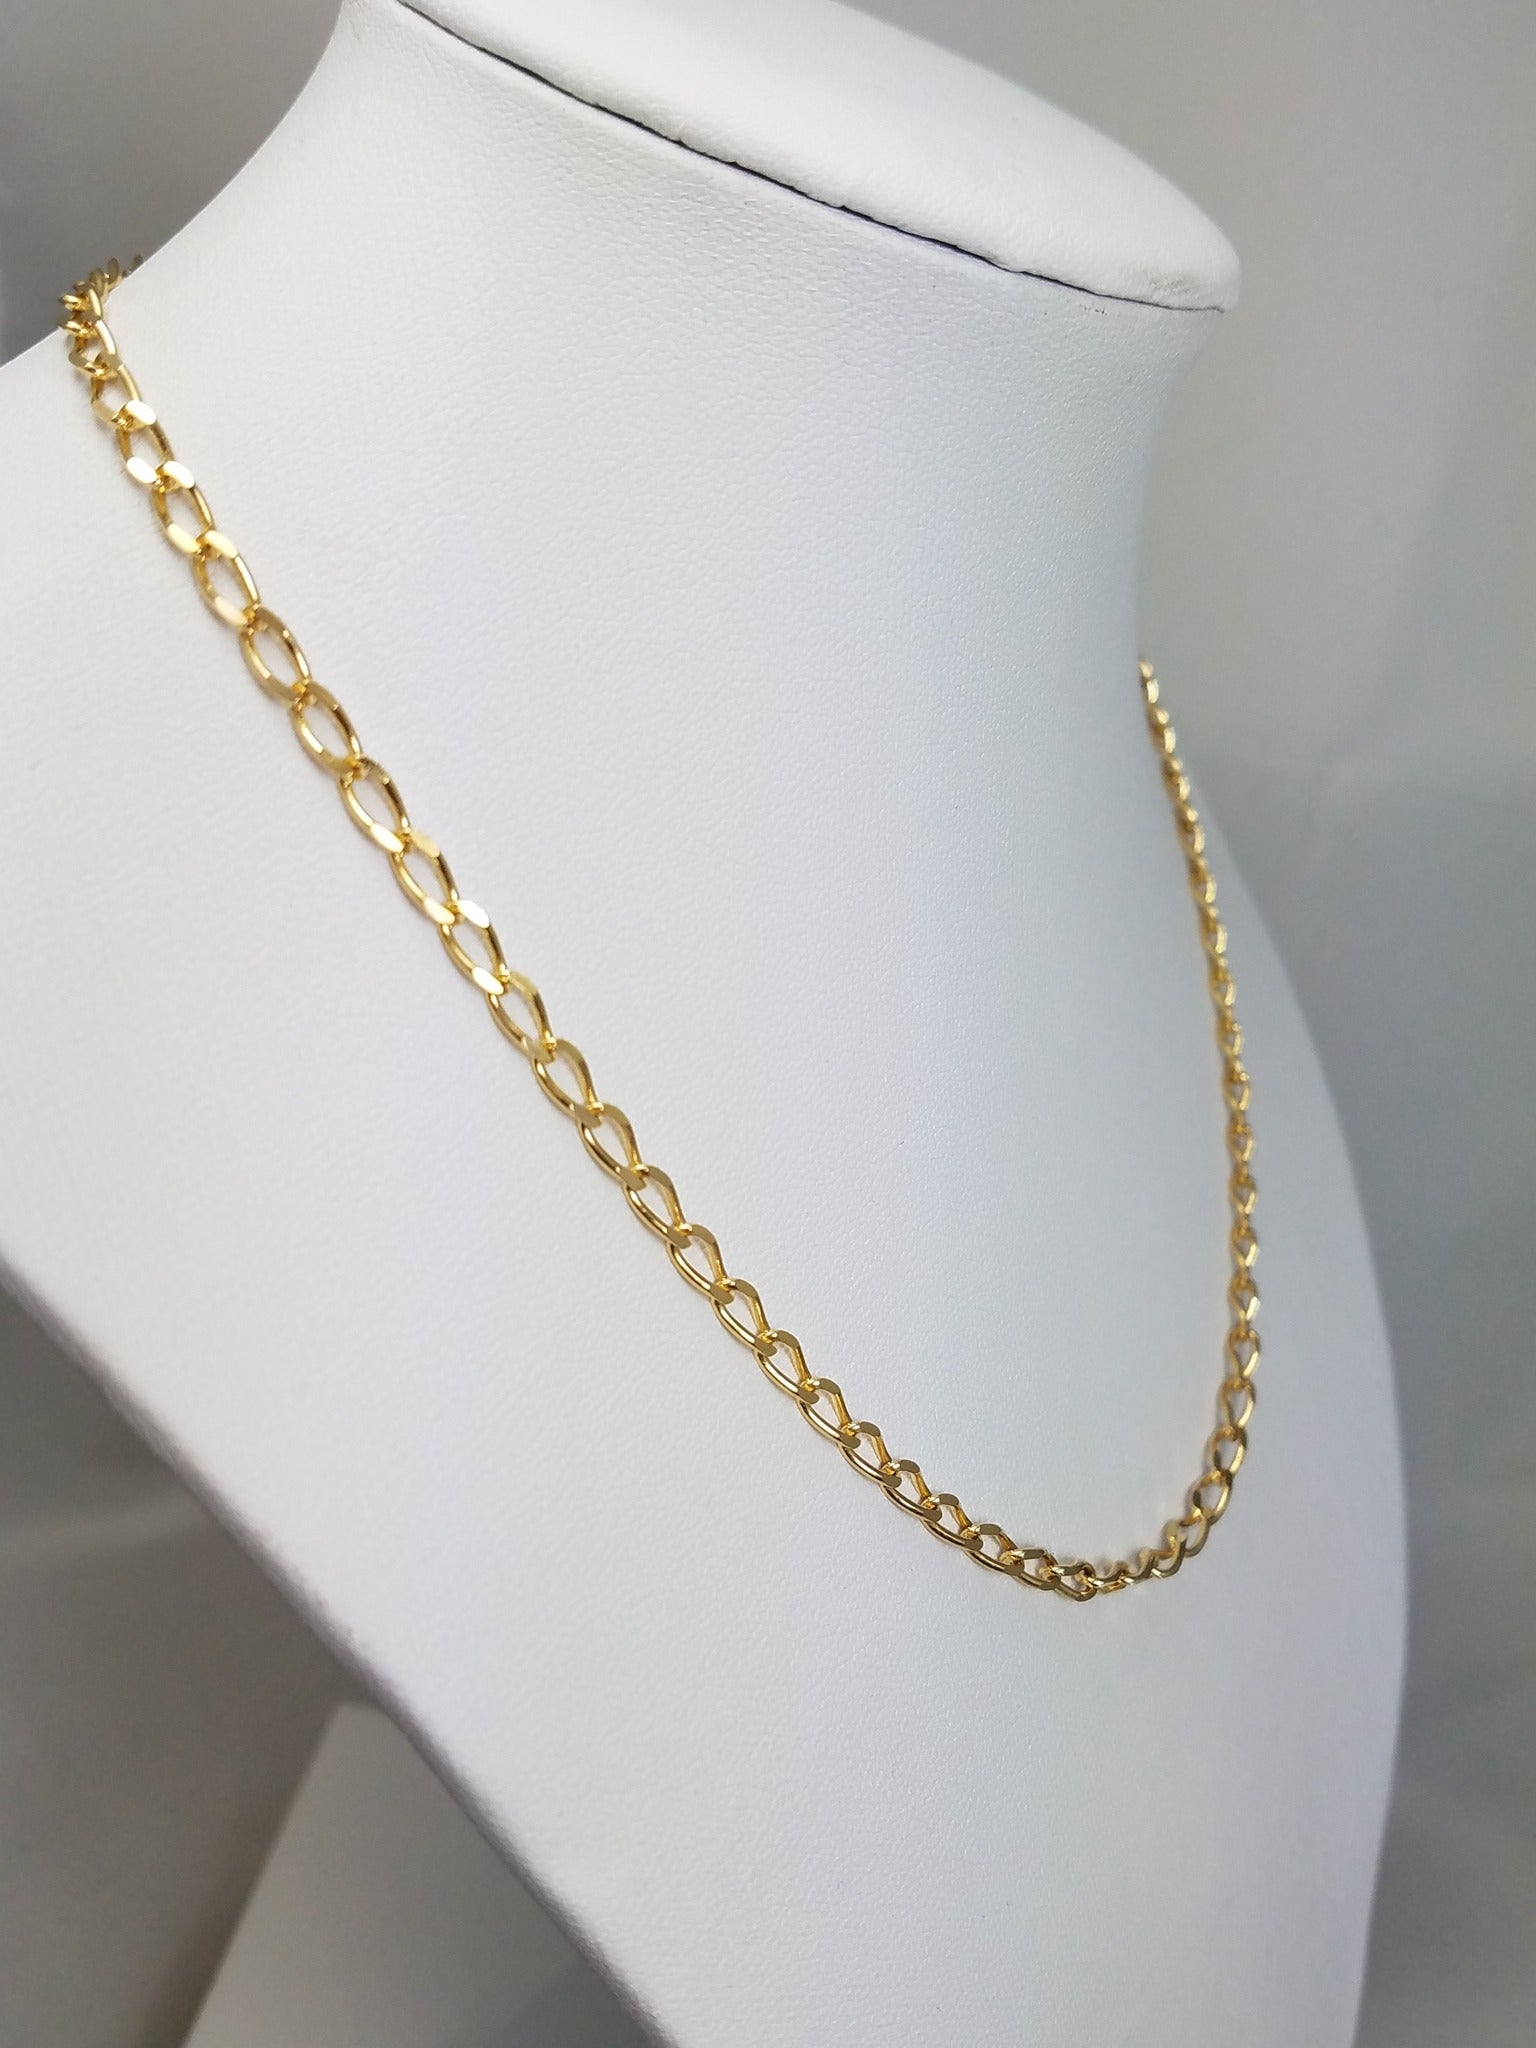 16" 10k Solid Yellow Gold Fancy Link Chain Necklace